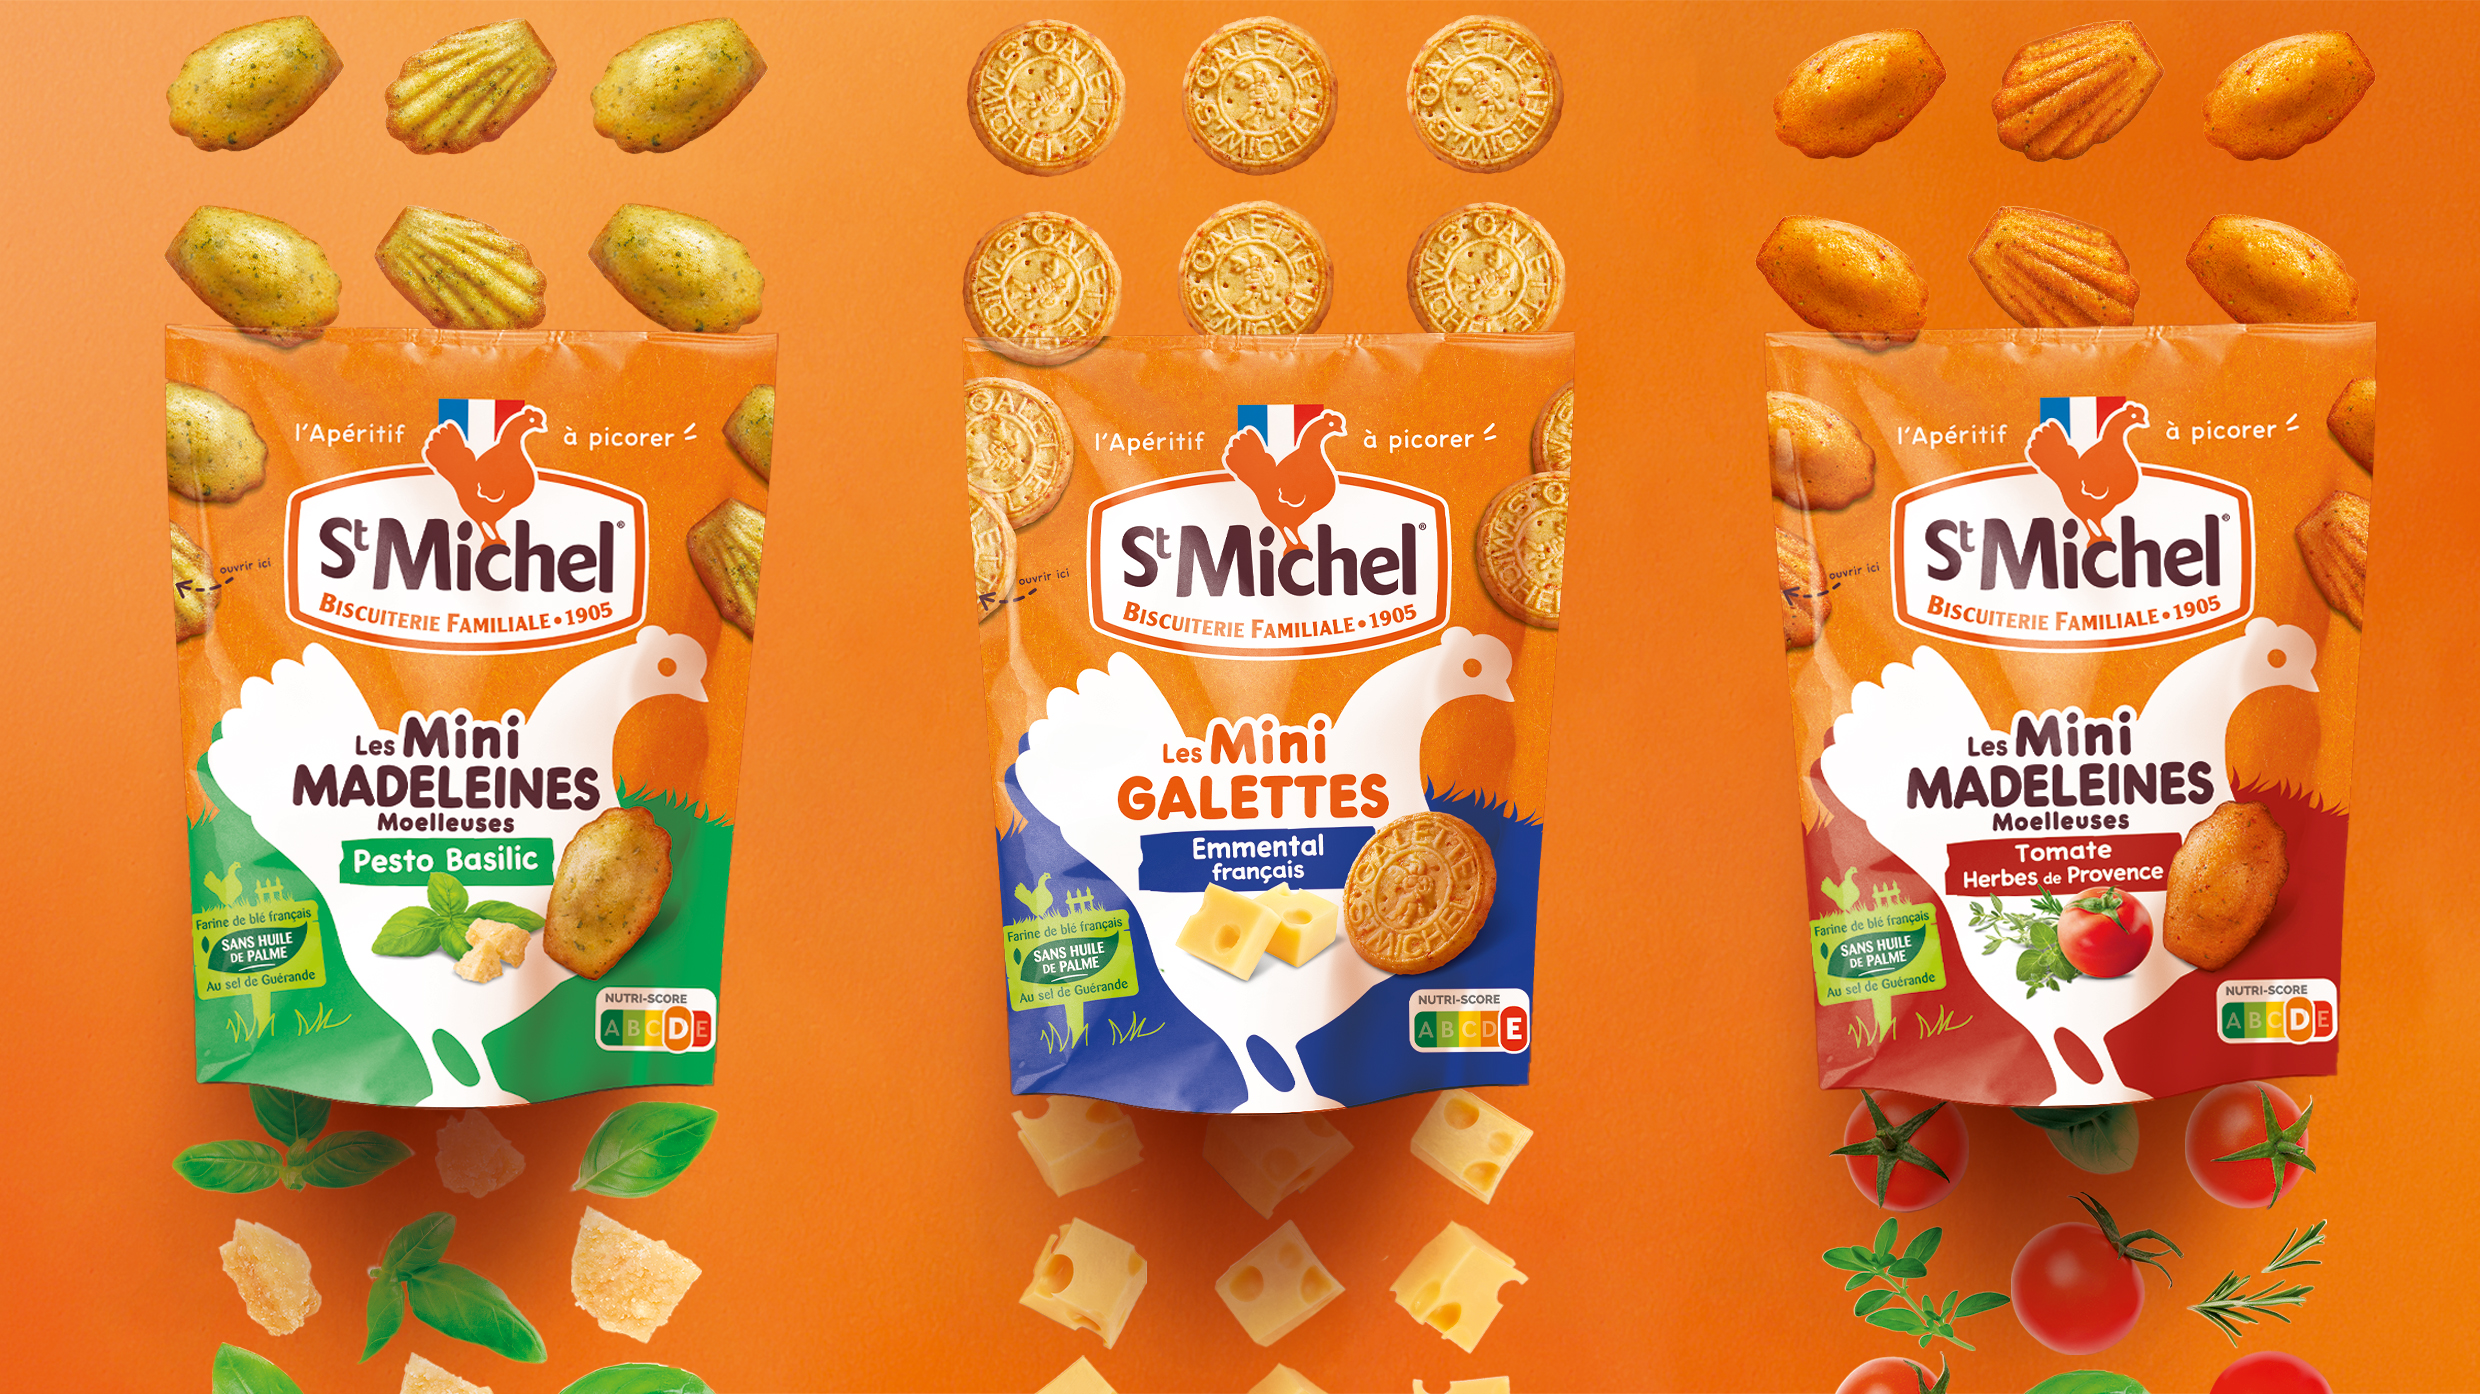 3 new St-Michel innovations: basil pesto madeleines, Provence herb tomato madeleines and Emmental galettes